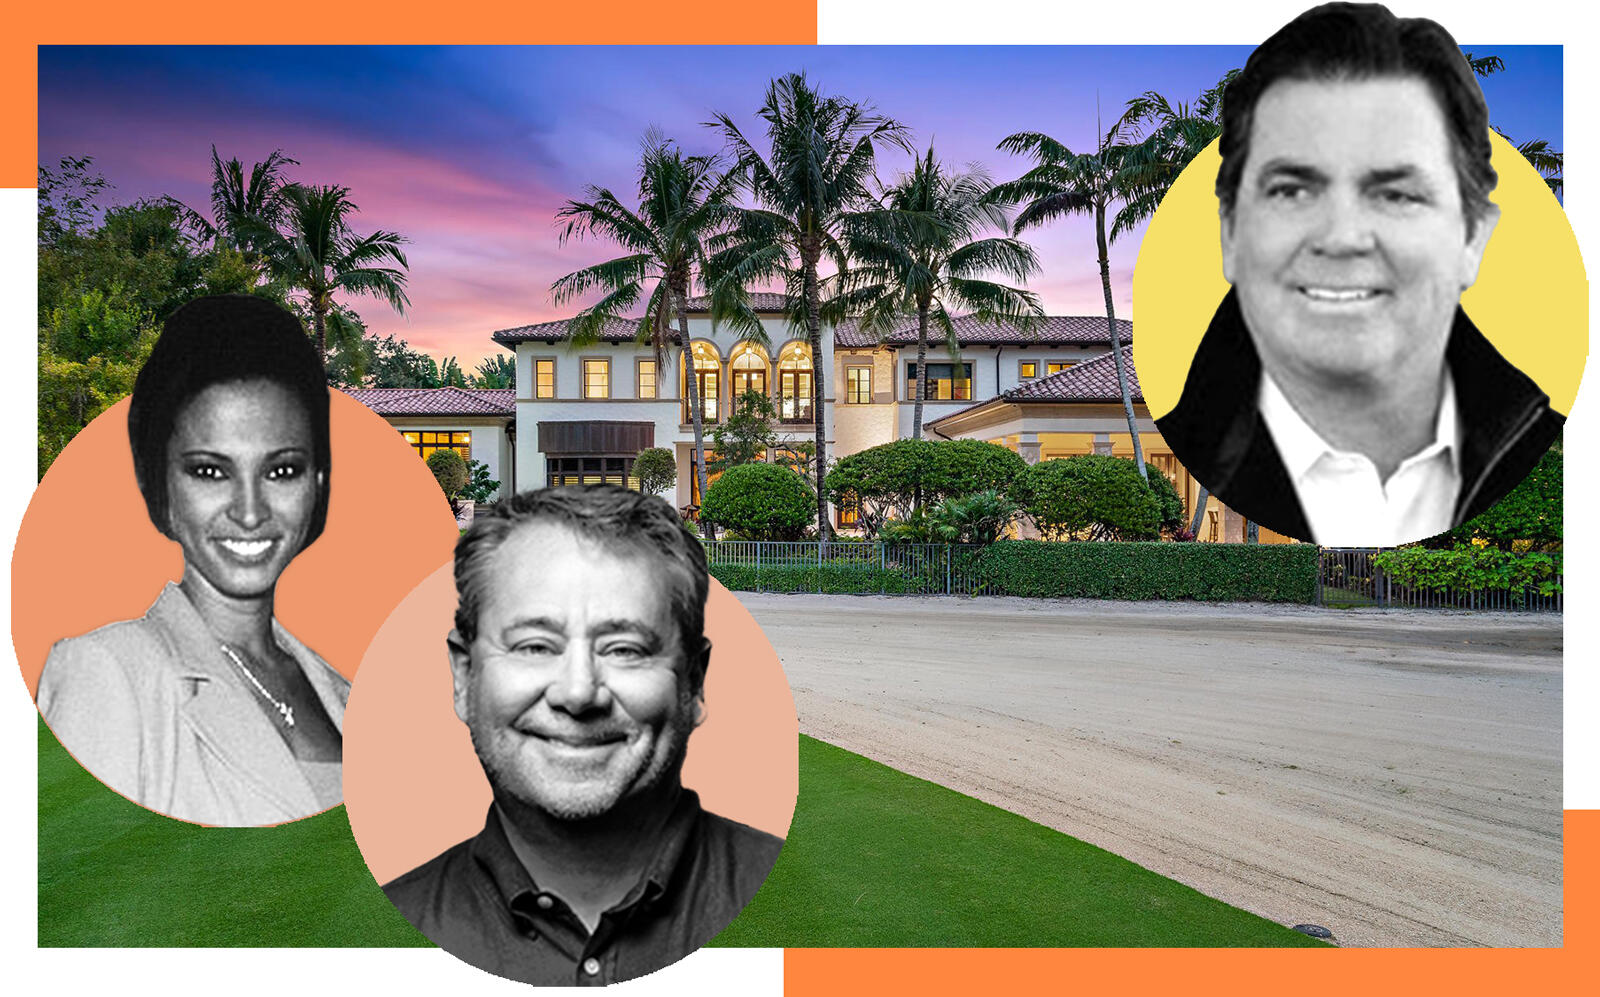 From left: Karin Katherine Taylor, William Weisberg and John Hague with 11759 Elina Court, Palm Beach Gardens (Photos via Getty, Affiliated Distributors, Hague Capital Partners, Leibowitz Realty Group)